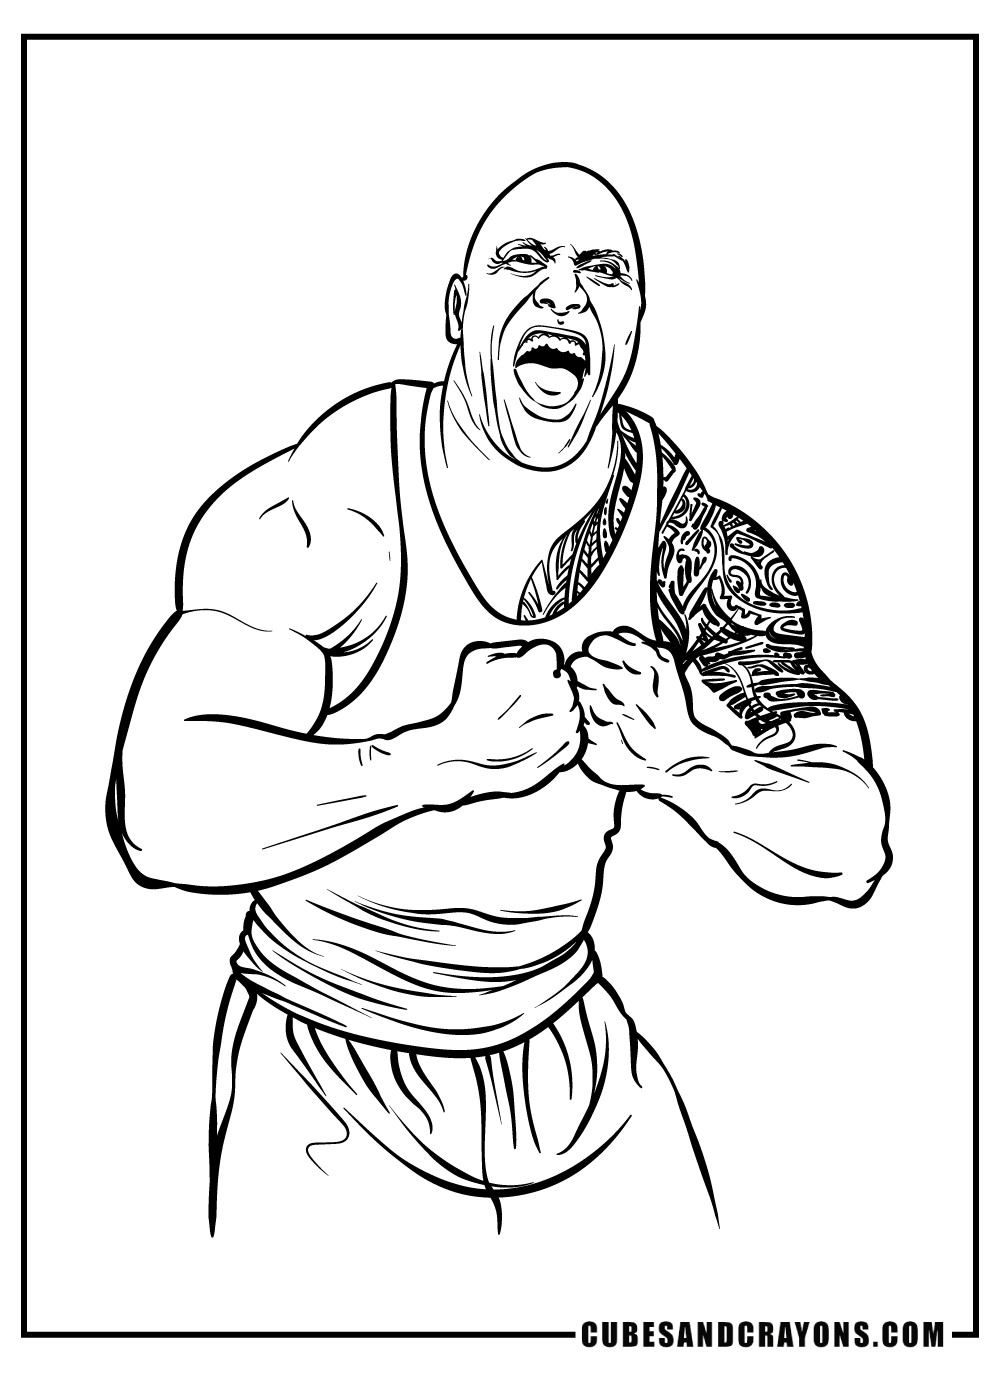 WWE Coloring Pages for kids free download